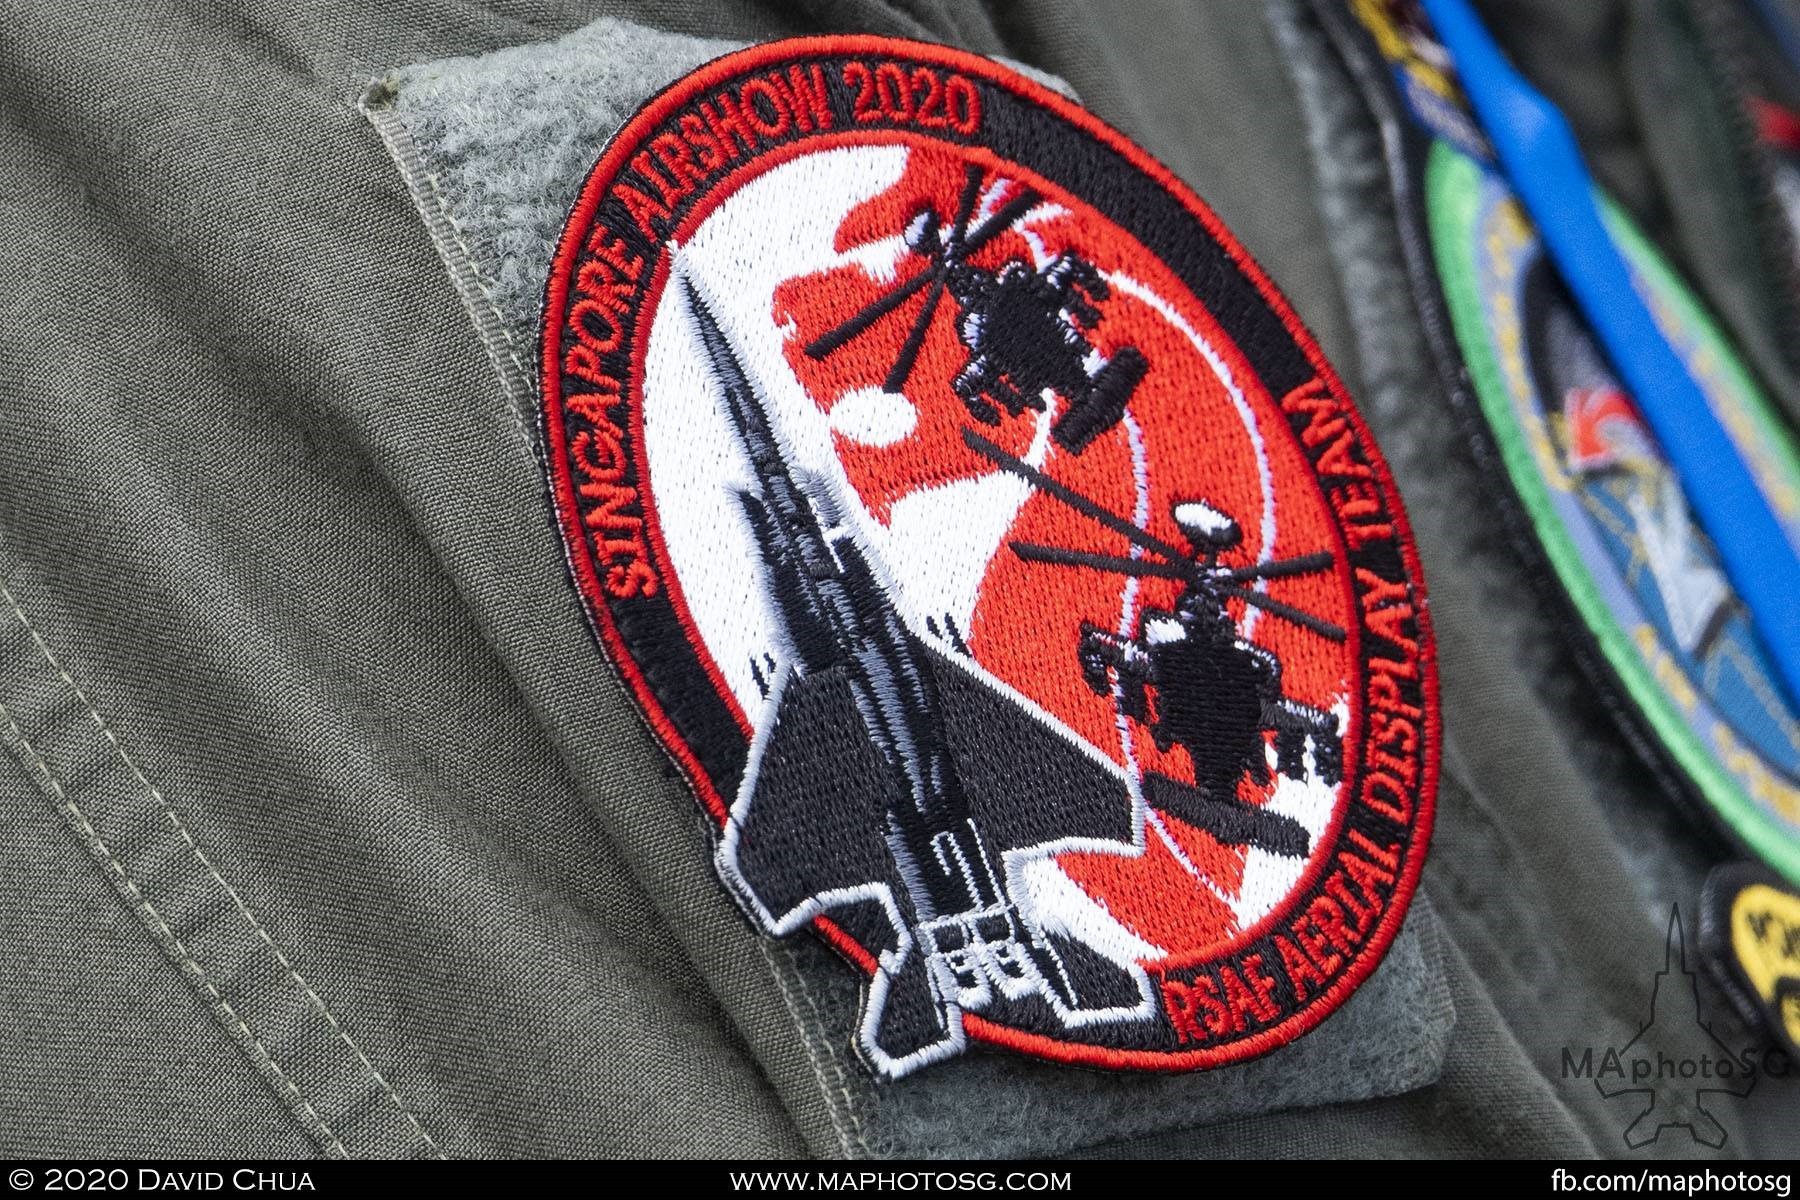 Special patch of the RSAF Aerial Display Team for Singapore Airshow 2020